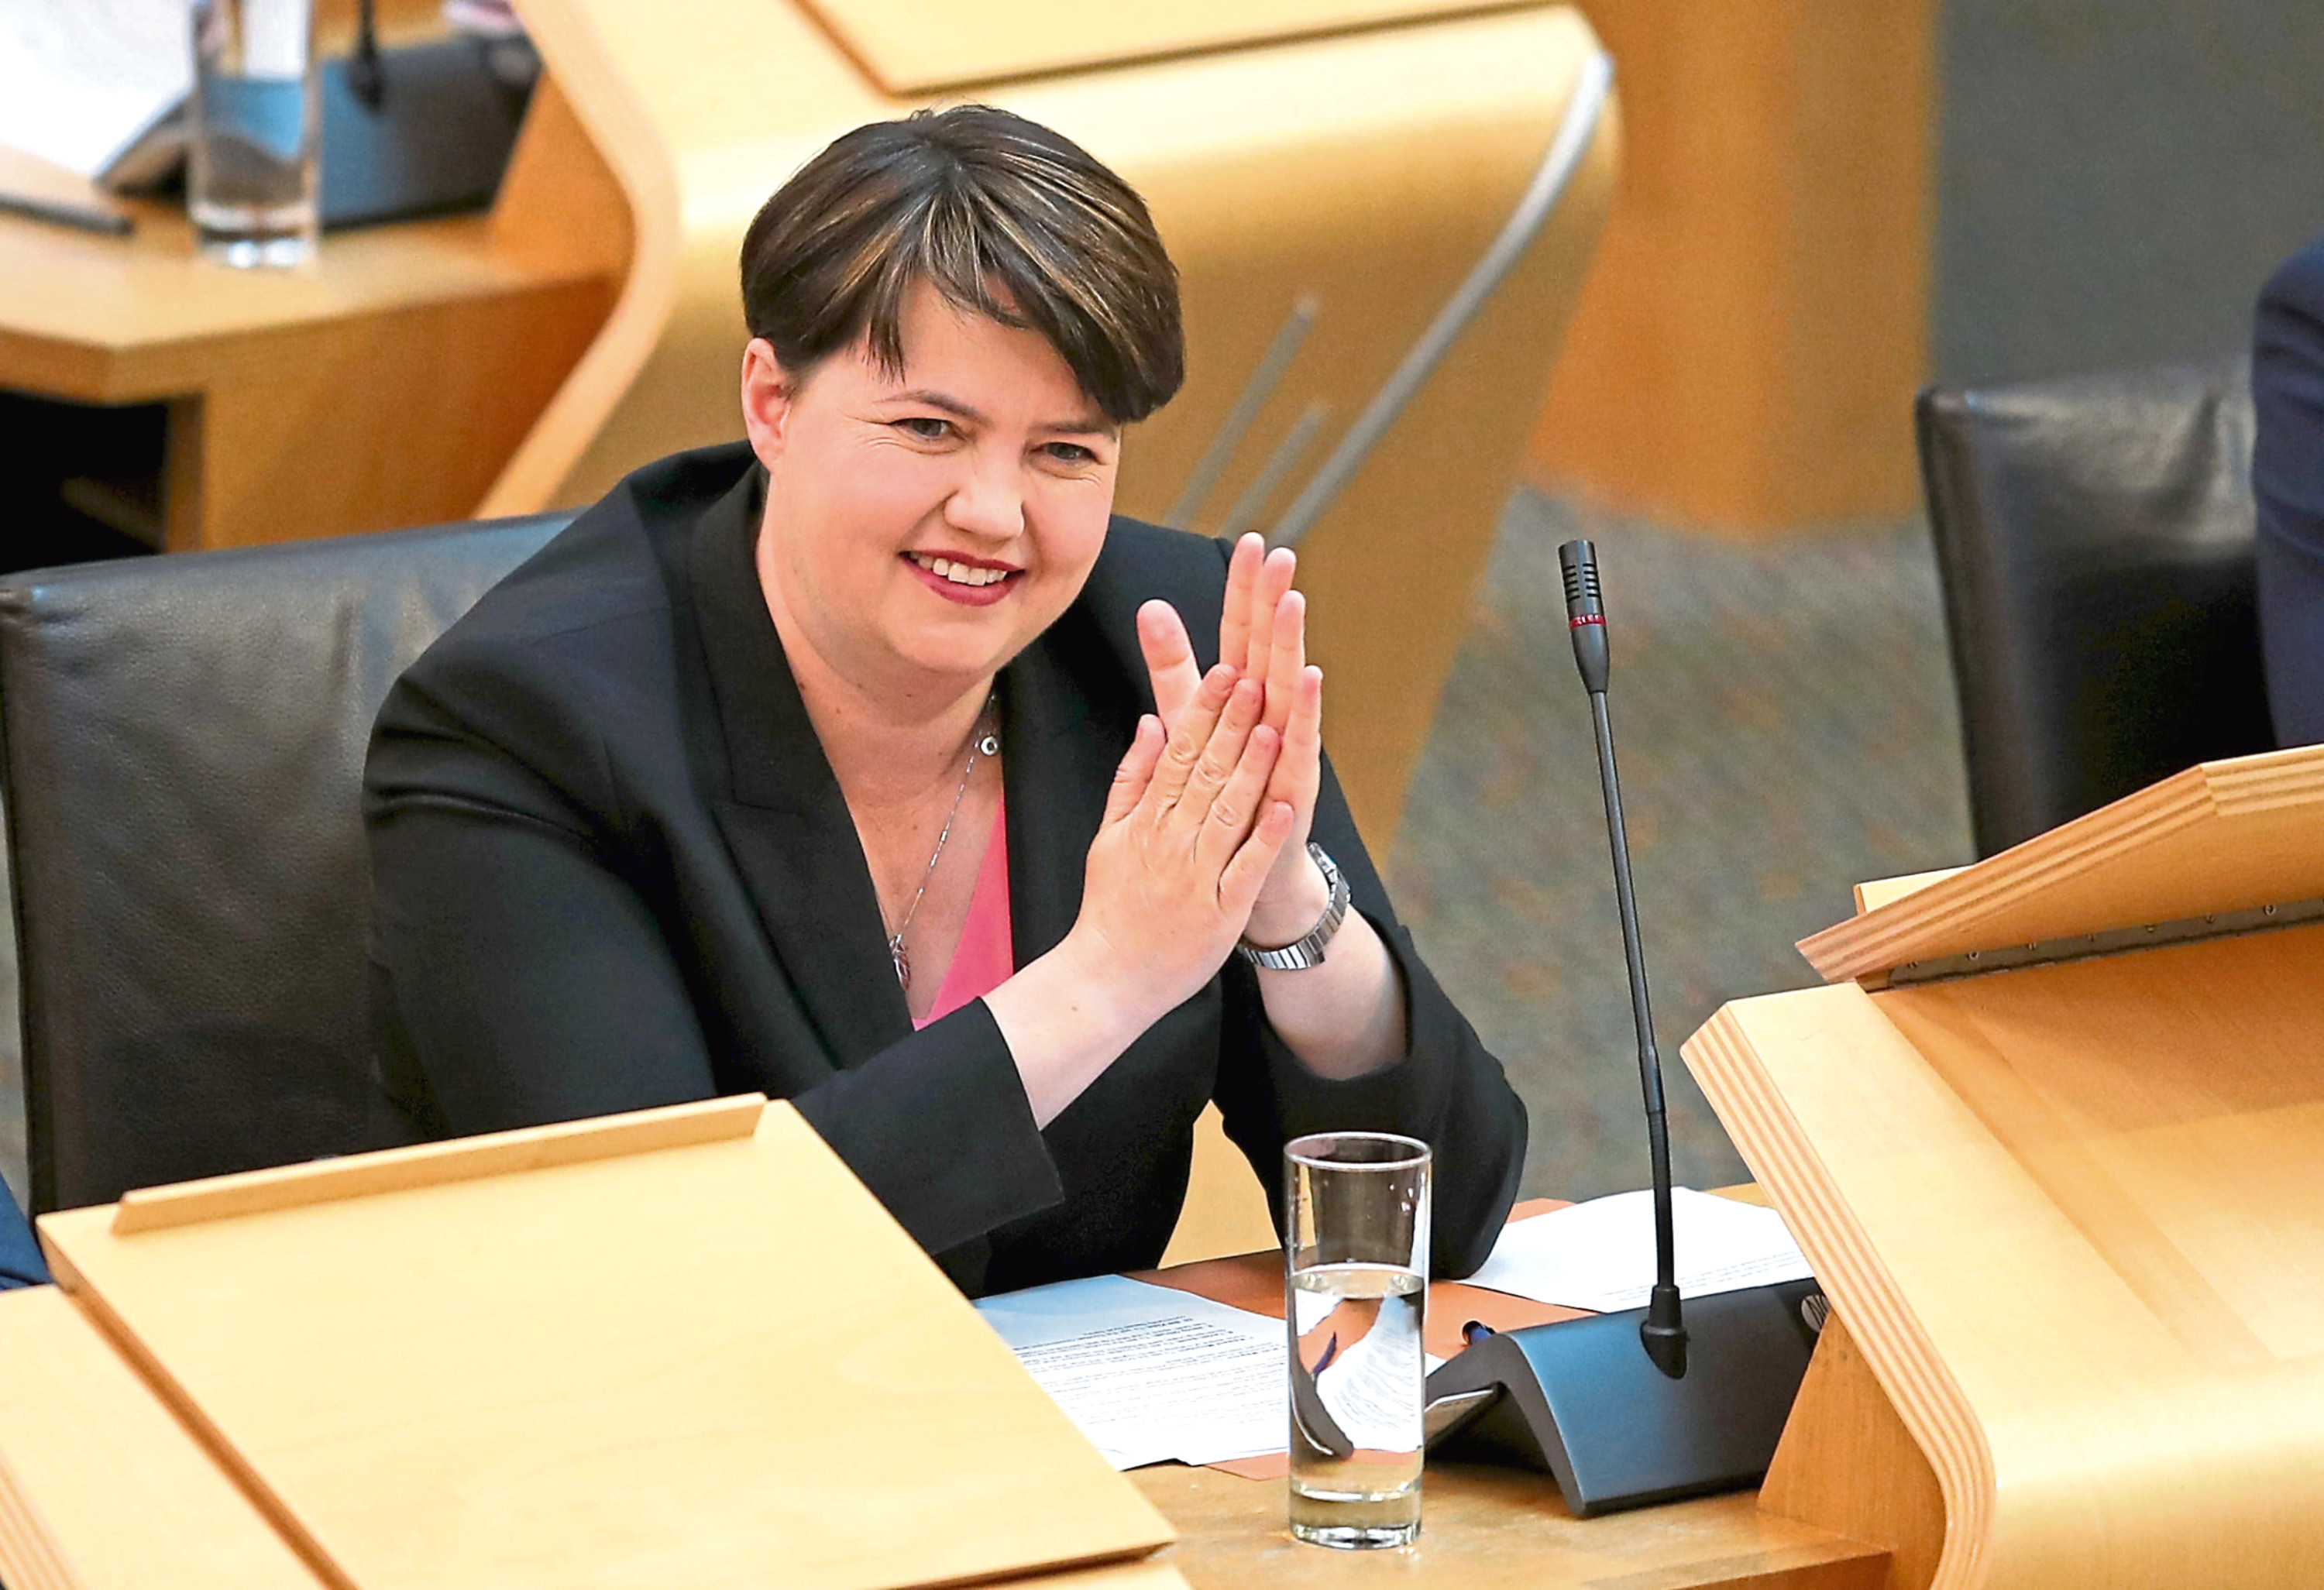 Former Scottish Conservative leader Ruth Davidson during First Minister's Questions at the Scottish Parliament in Edinburgh.